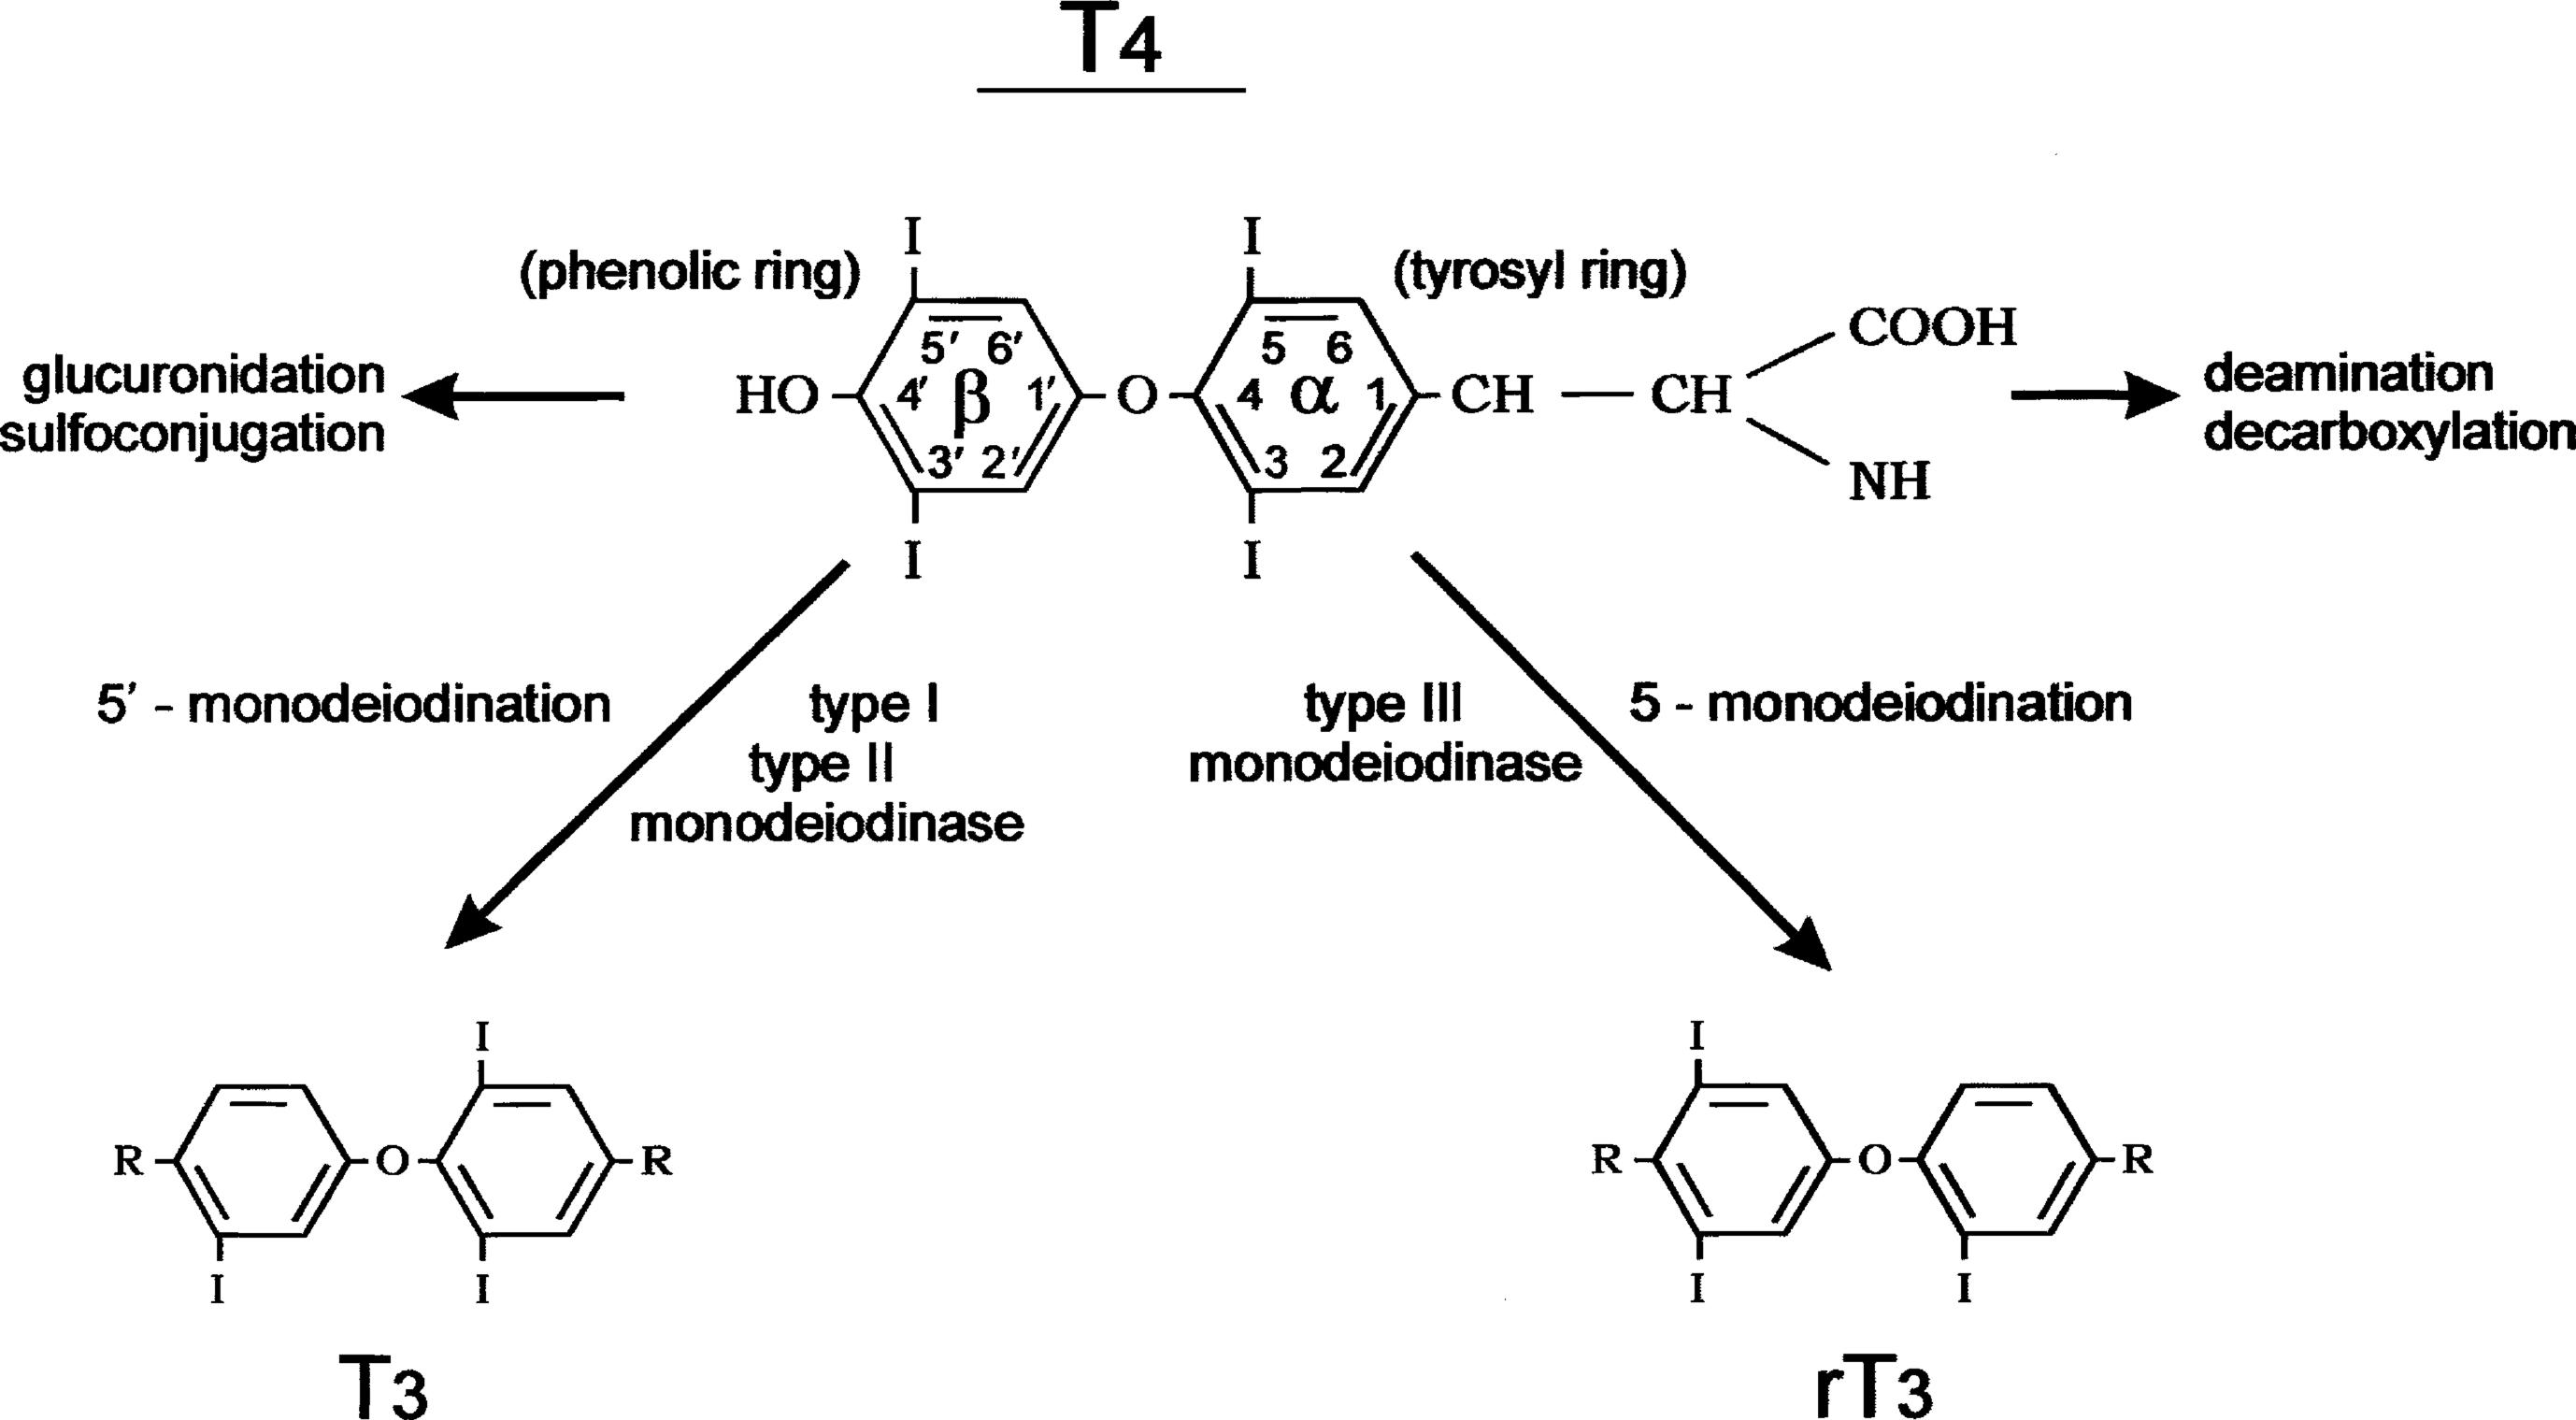 Fig. 13.2, The metabolism of thyroxine (tetraiodothyronine). The major metabolic pathway is progressive monodeiodination mediated by the three iodothyronine monodeiodinase enzymes type I, type II, and type III. Outer (phenolic) ring 5’monodeiodination produces active 3,5,3’ triiodothyronine. Inner (tyrosyl) ring 5’monodeiodination produces inactive reverse 3,3,5’ triiodothyronine. Type I deiodinase is also capable of inner-ring monodeiodination. The alanine side chain of the tyrosyl ring is also subject to degradative reactions, including deamination and decarboxylation. Sulfoconjugation and glucuronide conjugation reactions at the 4’ phenolic ring site occur largely in liver tissue.